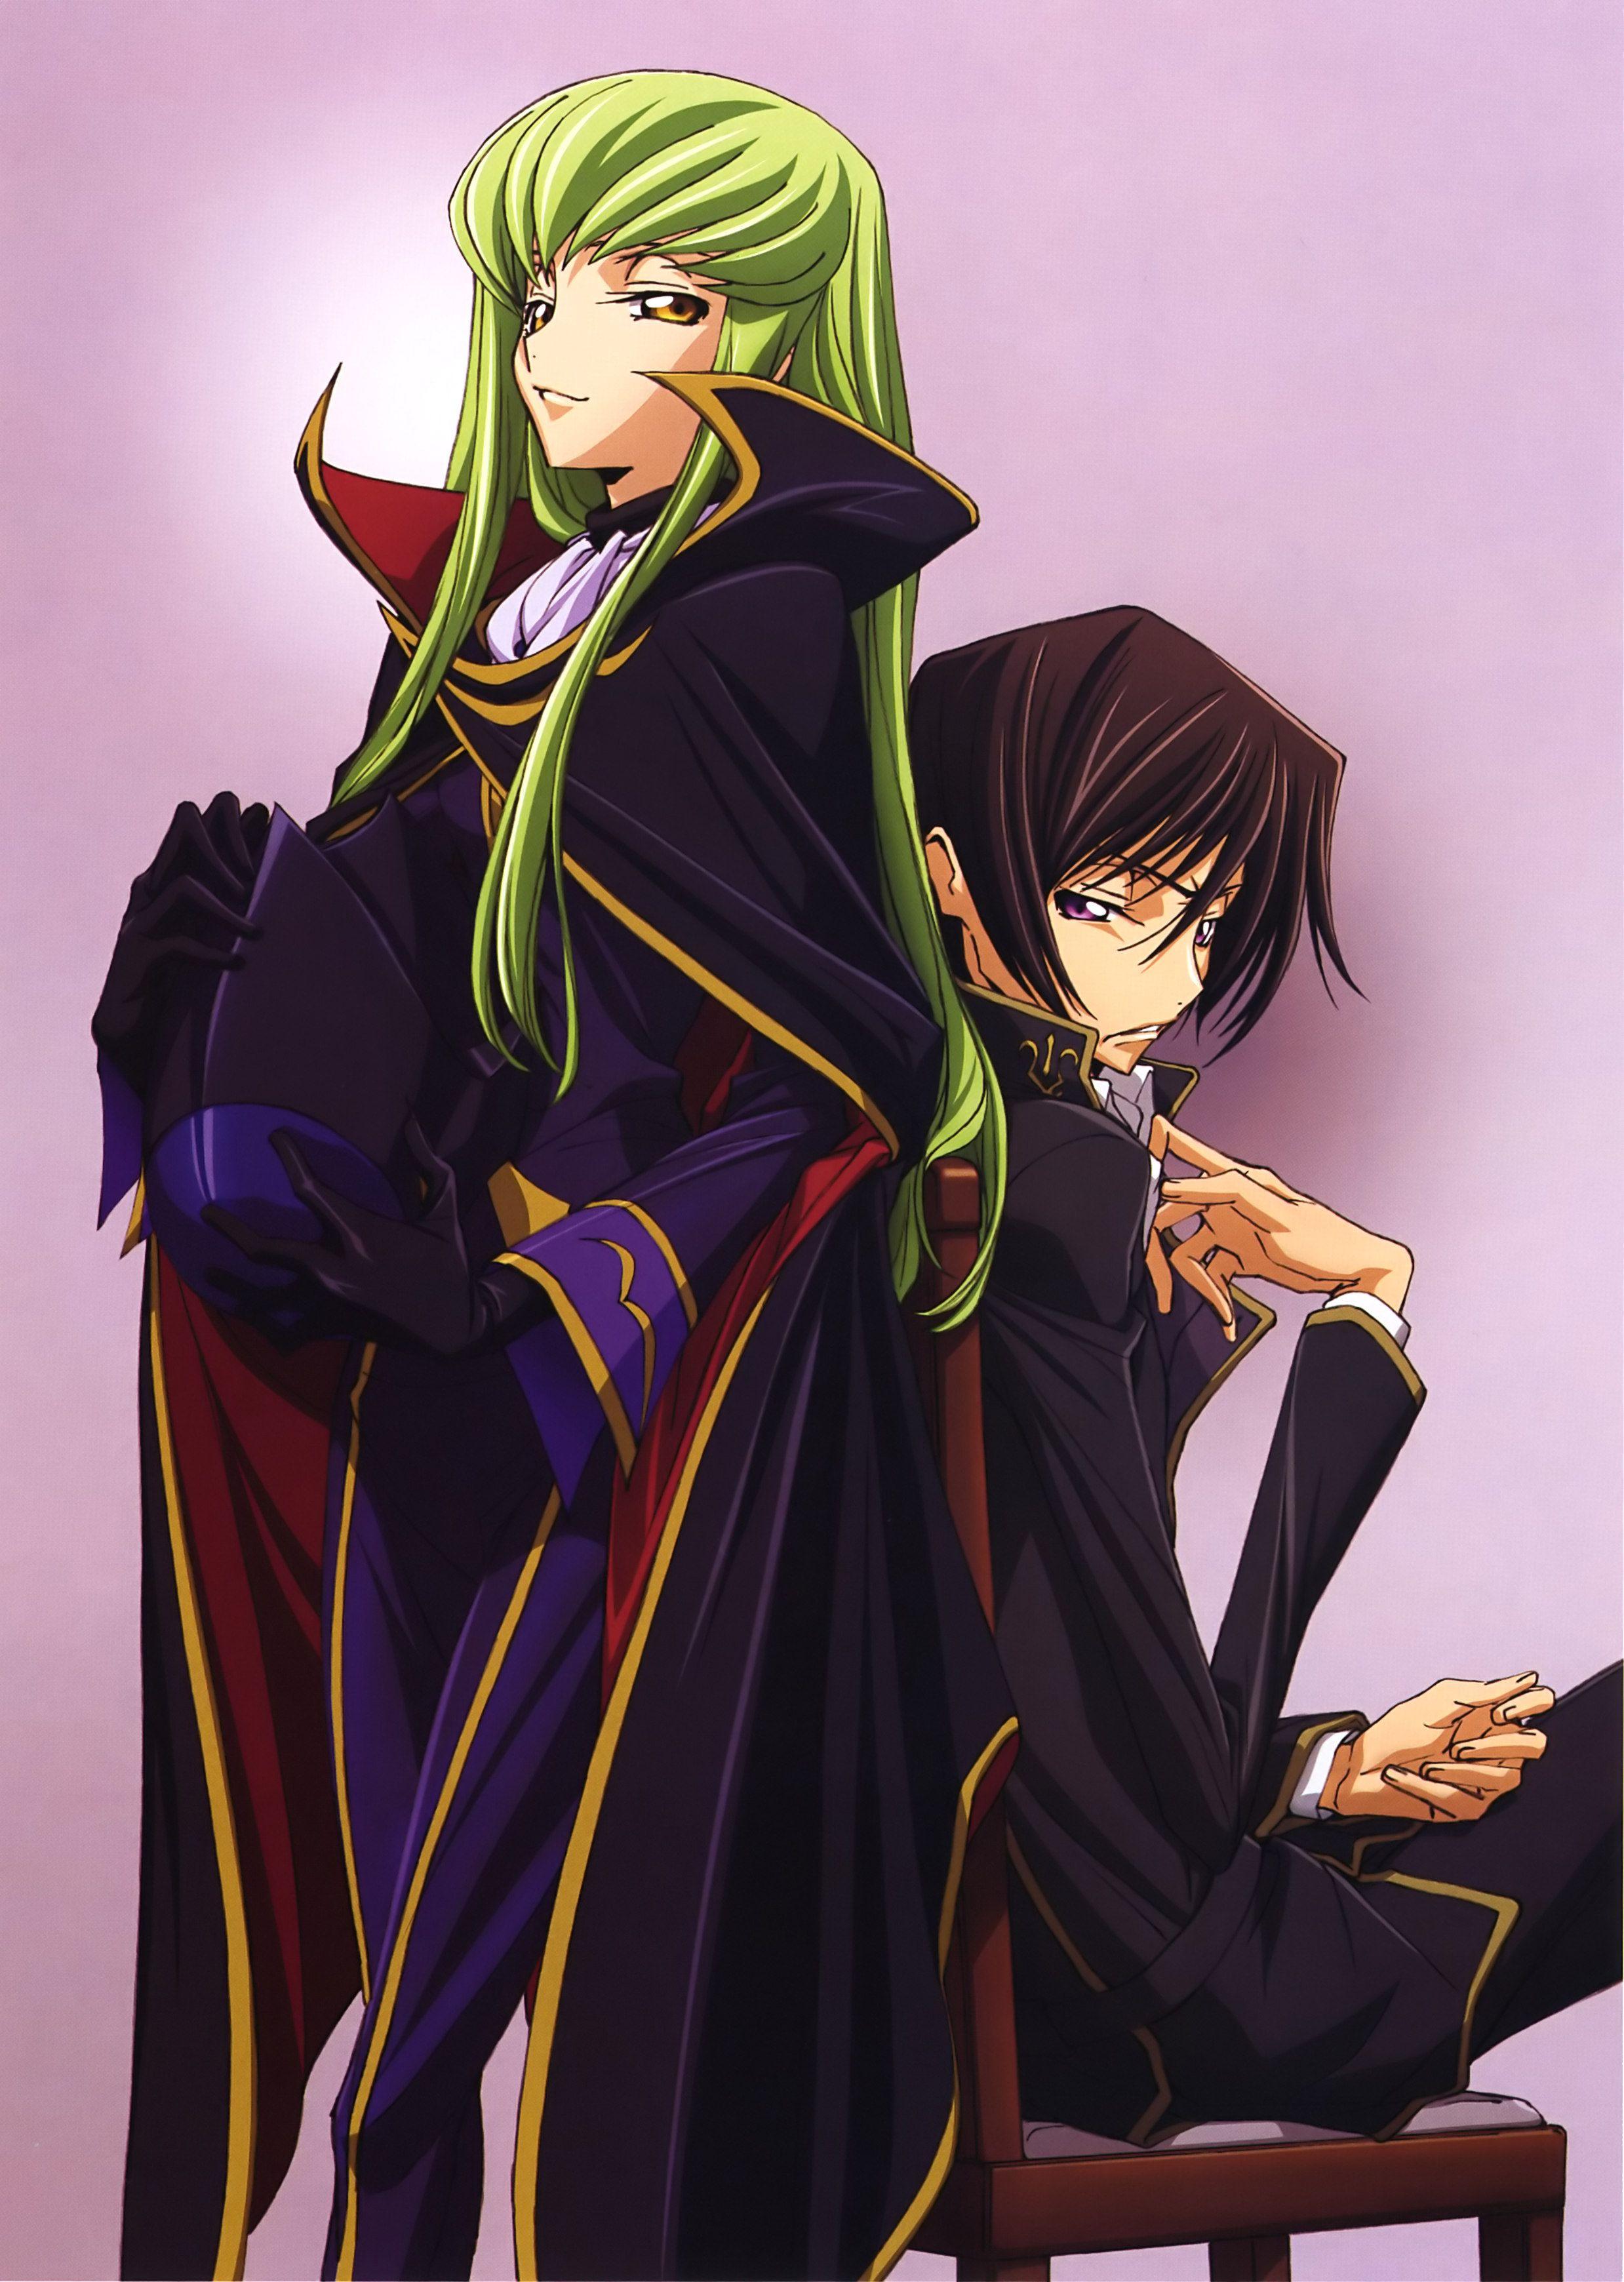 Why Did Cc Kiss Lelouch